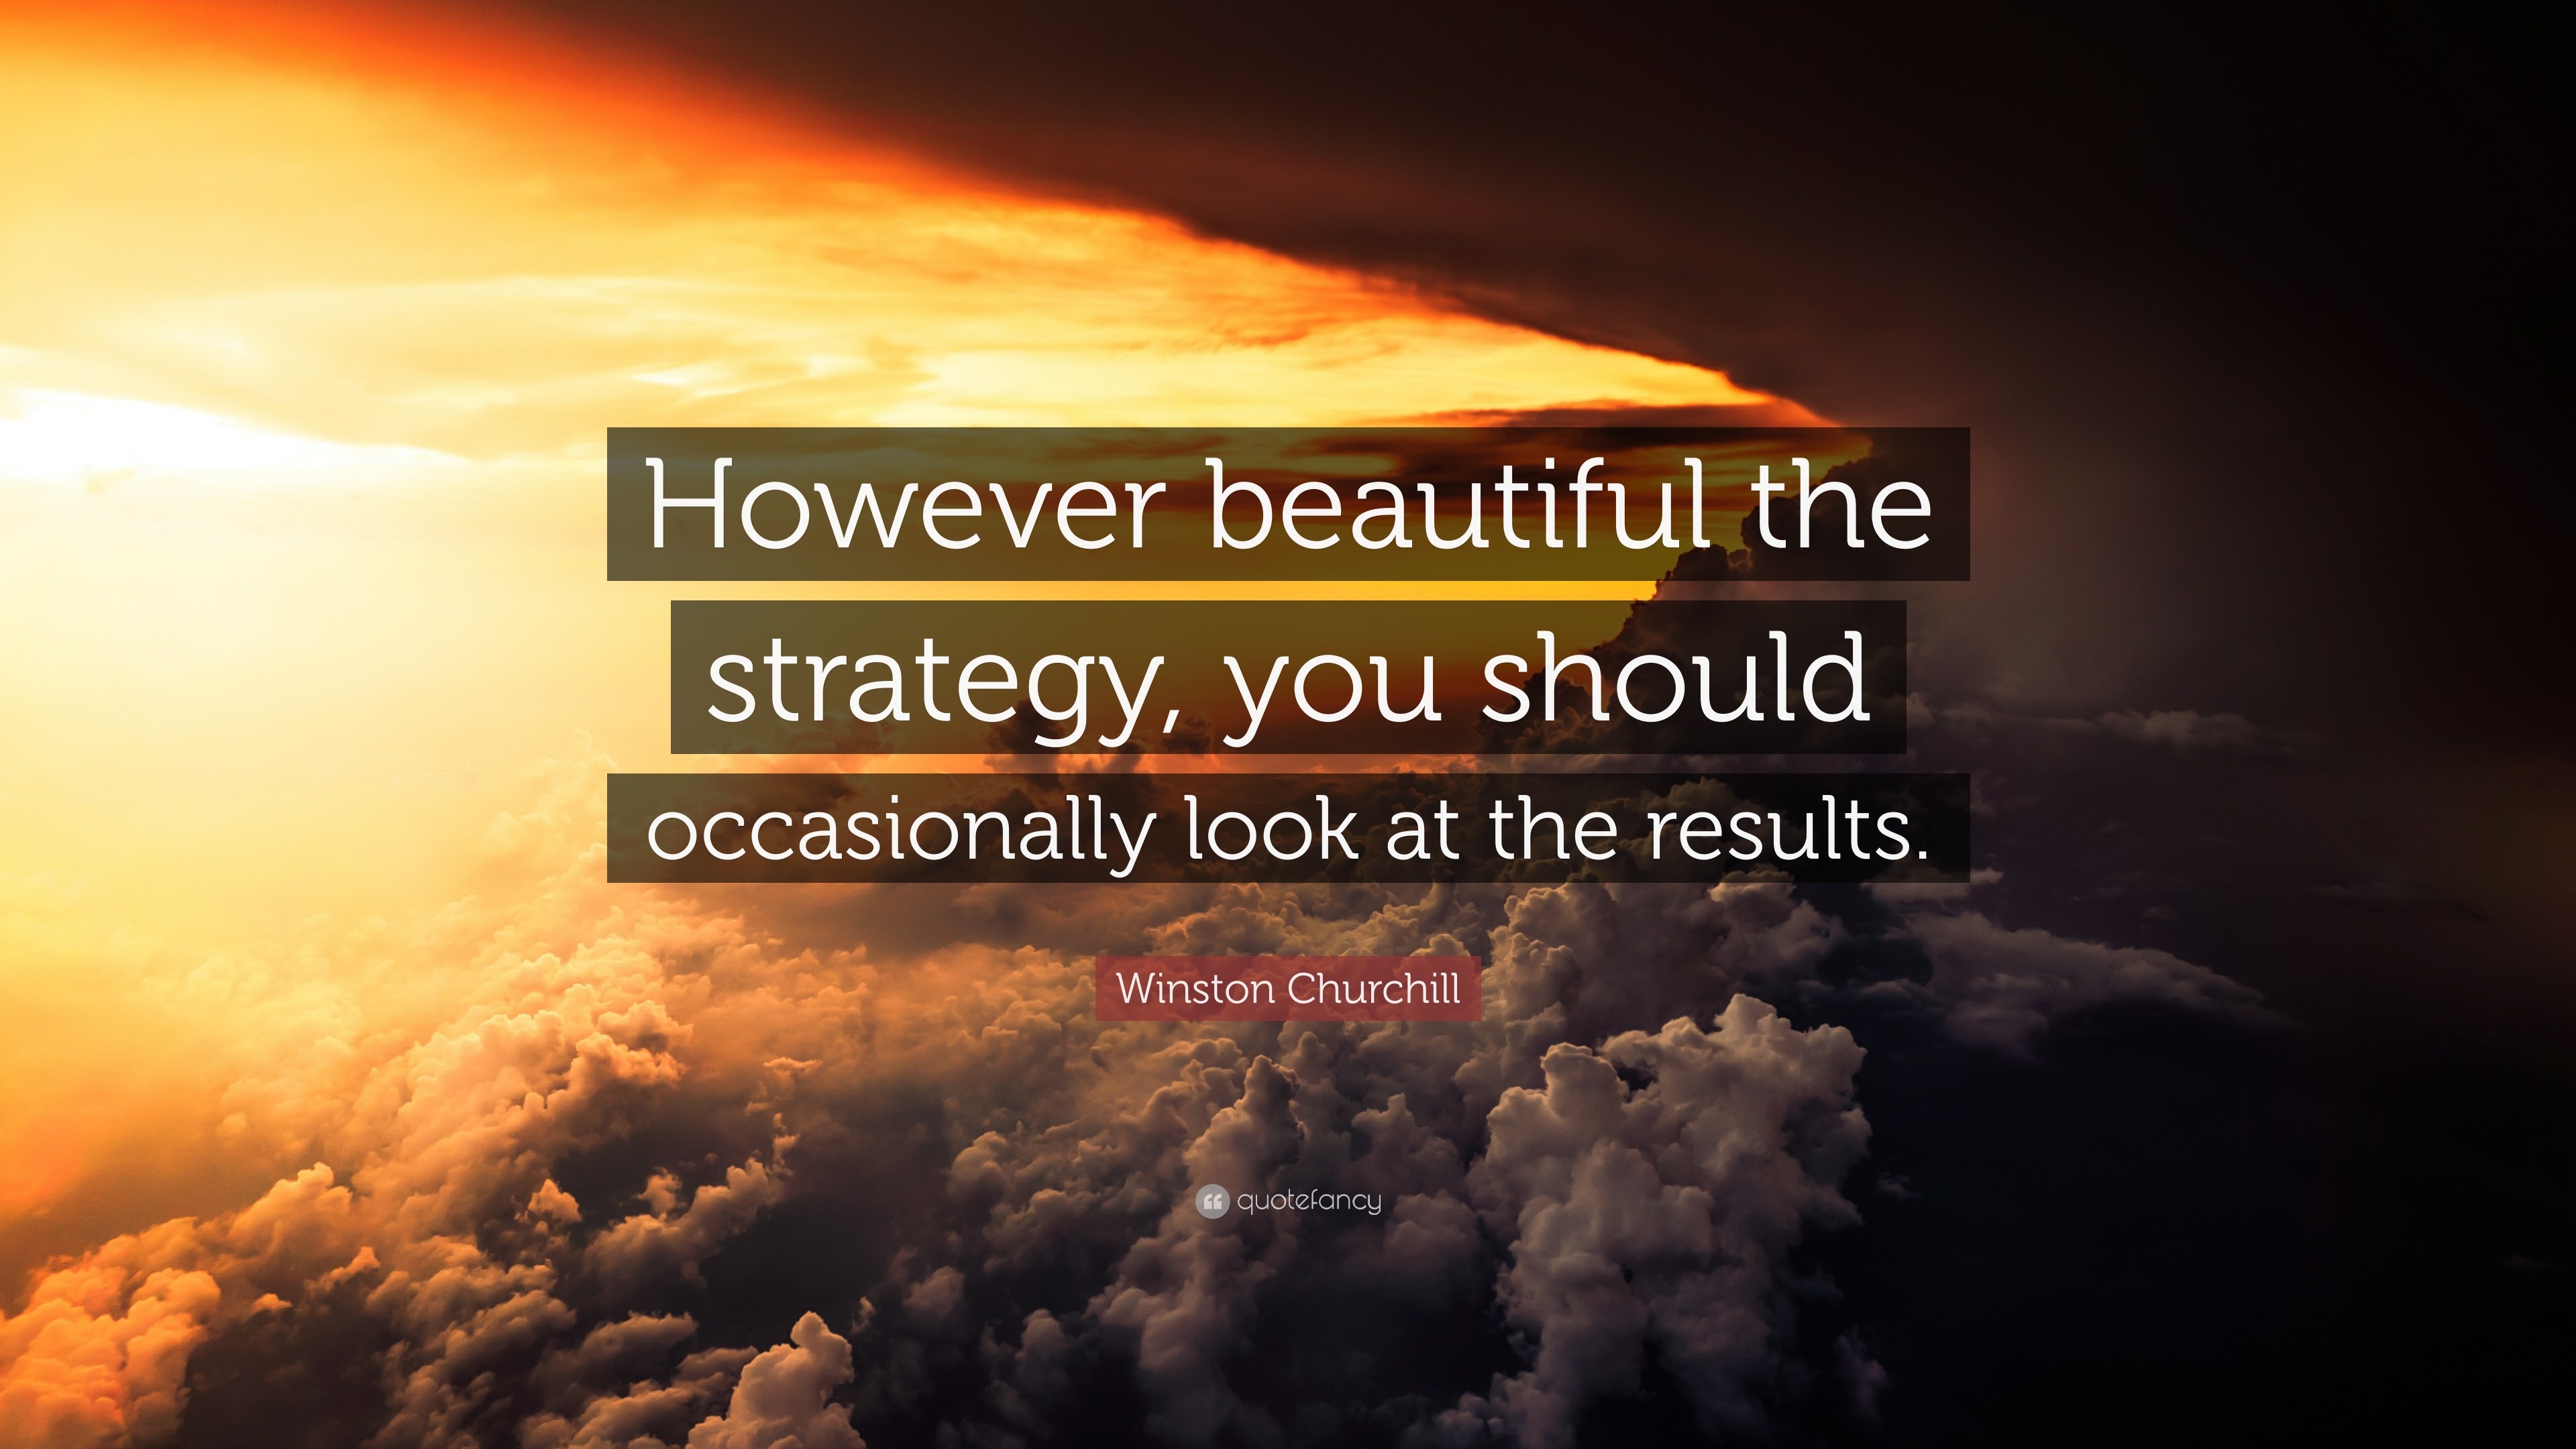 "however beautiful the strategy, you should occasionally look at